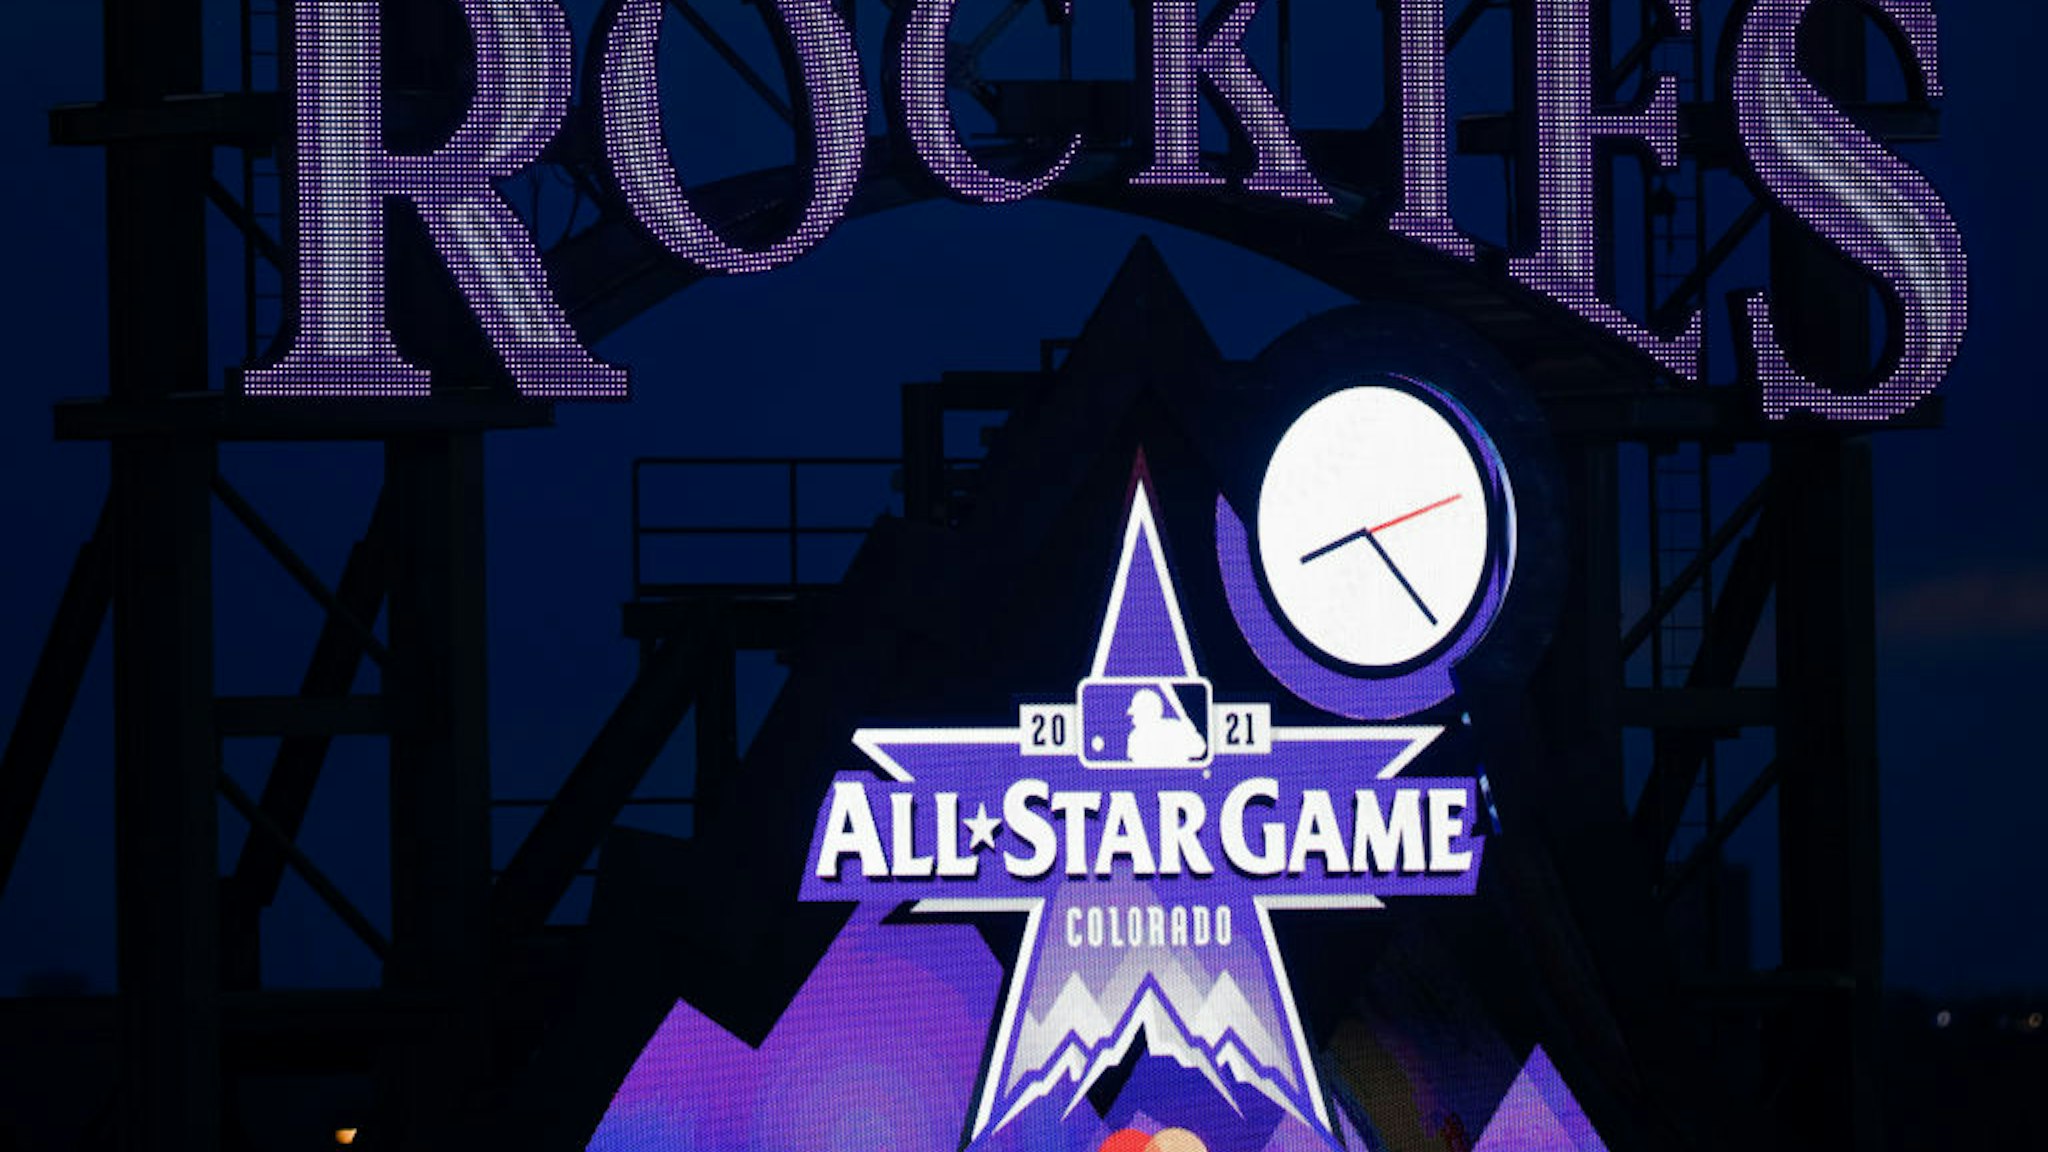 DENVER, CO - MAY 13: A general view of the scoreboard featuring the All-Star Game logo during a game between the Cincinnati Reds and Colorado Rockies at Coors Field on May 13, 2021 in Denver, Colorado. (Photo by Justin Edmonds/Getty Images)